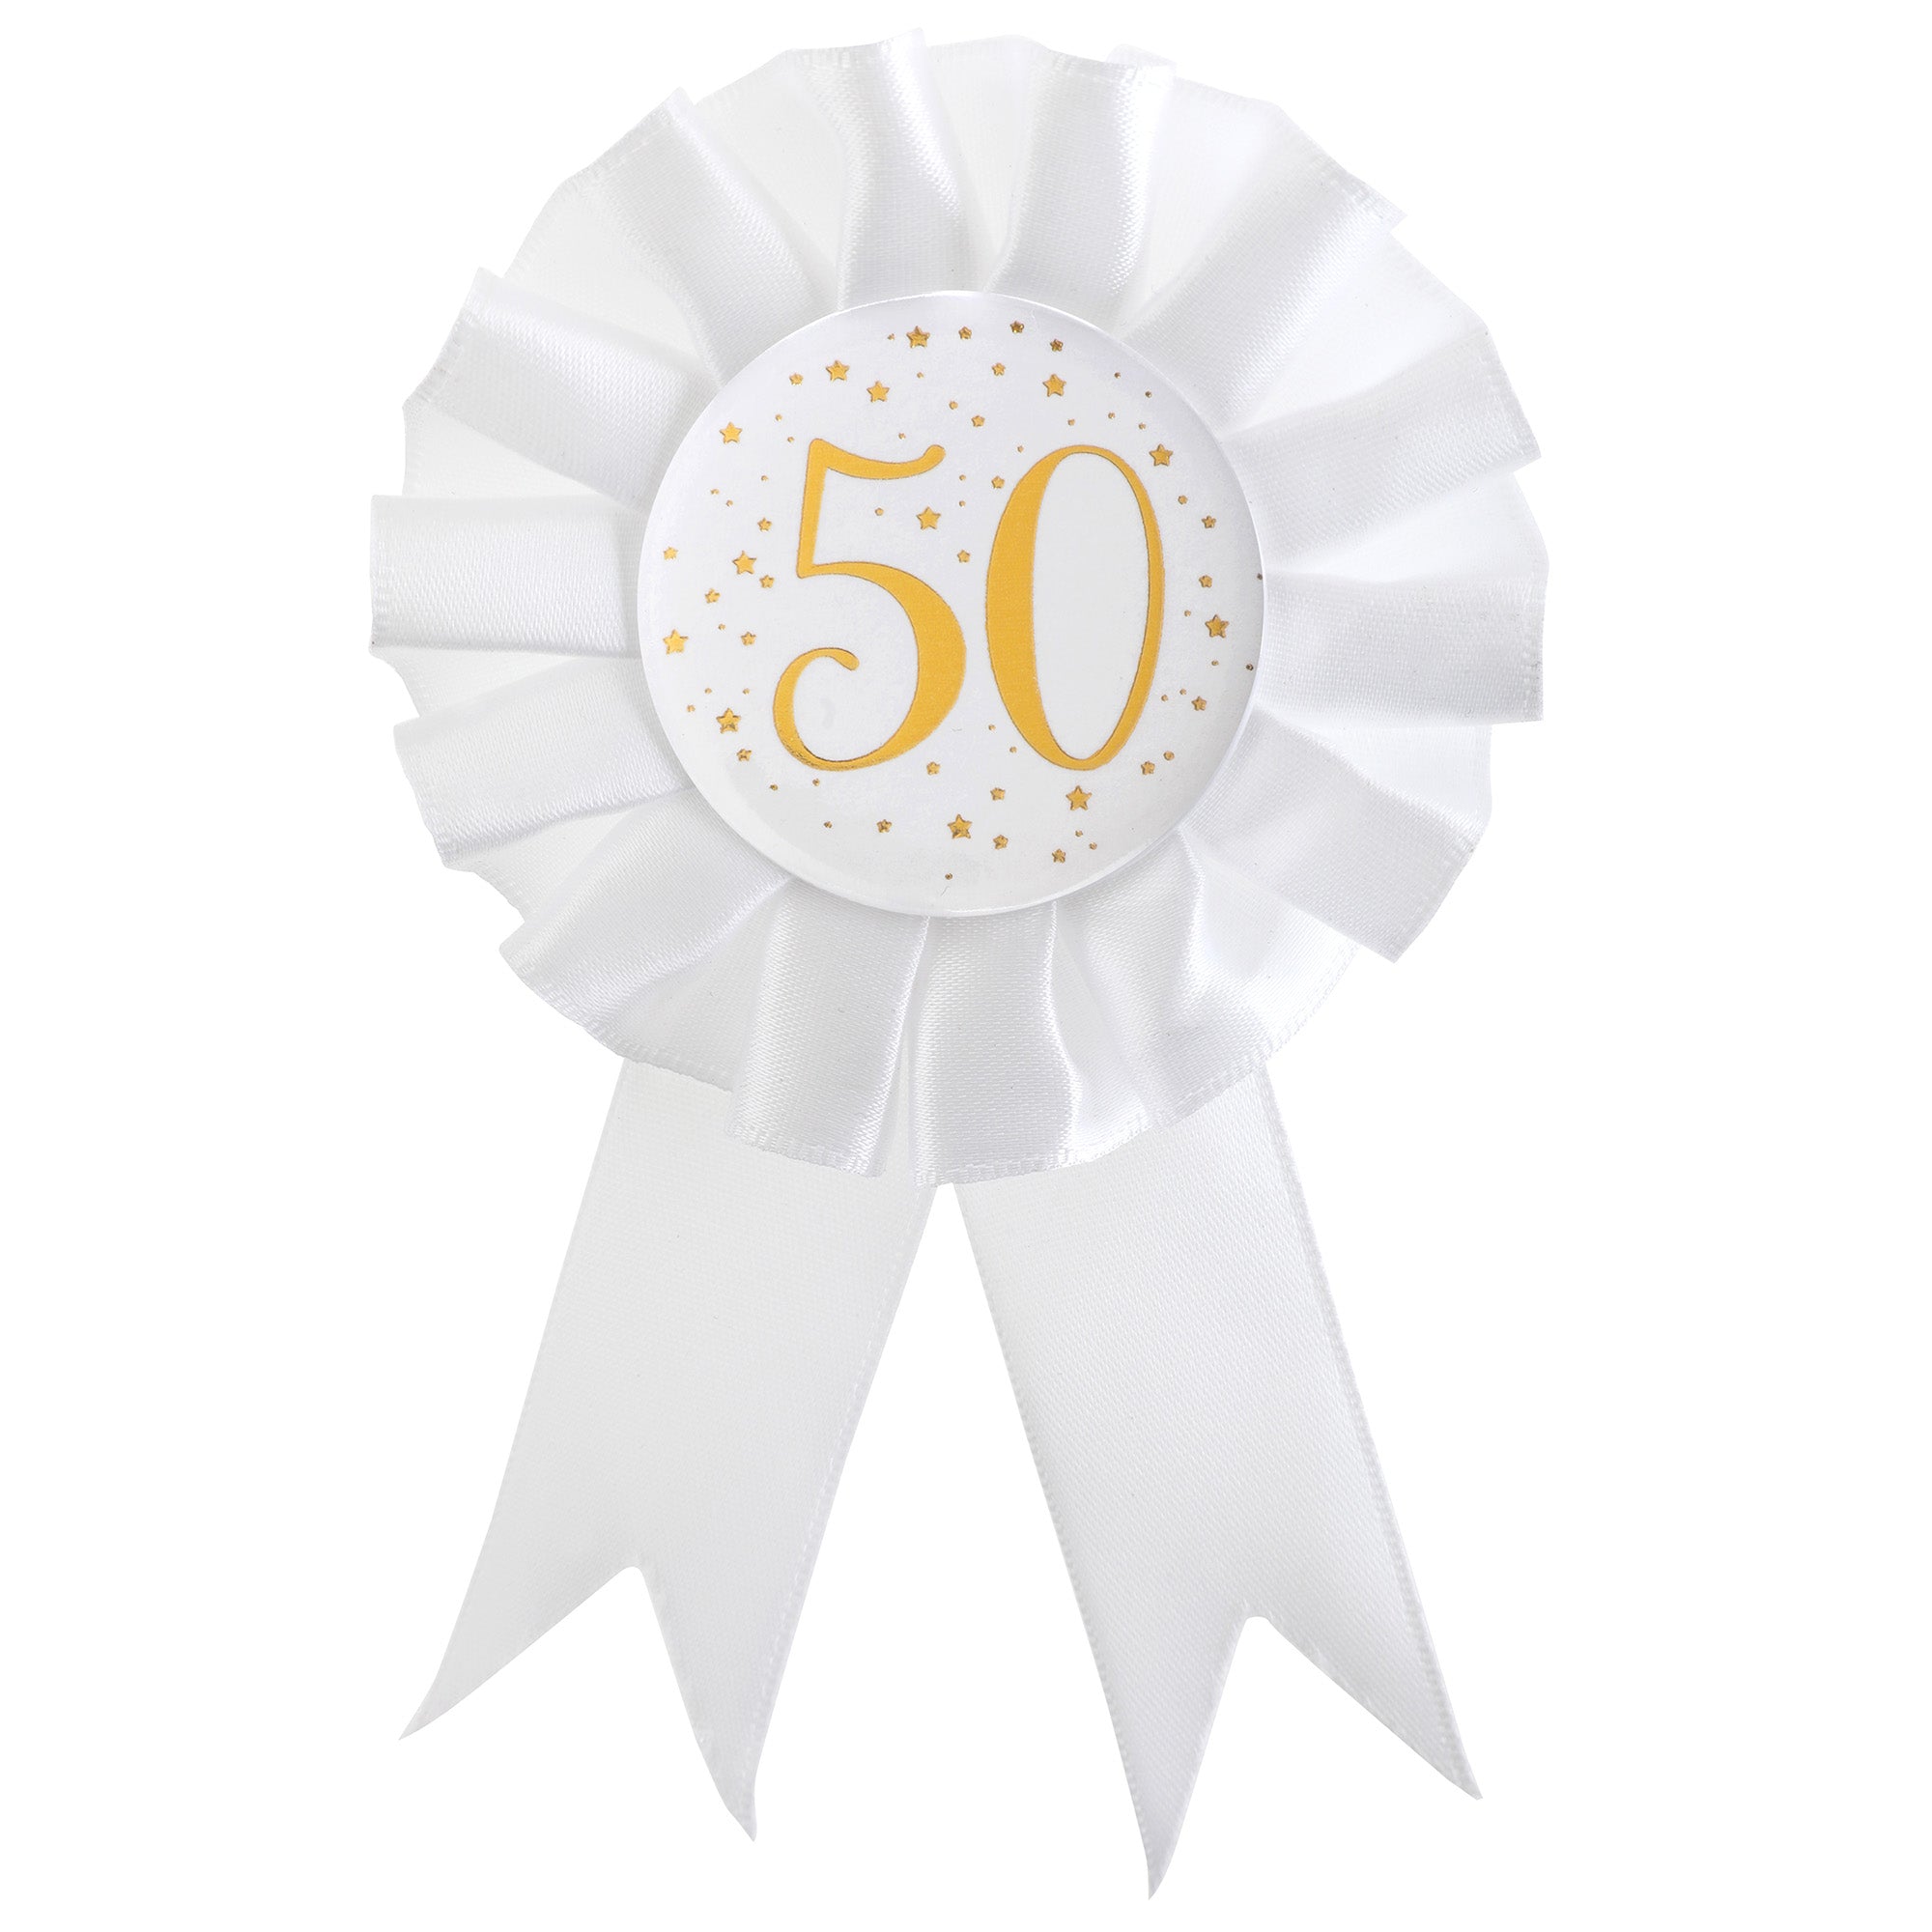 Age 50 Award Ribbon White and Gold 3.15x6in